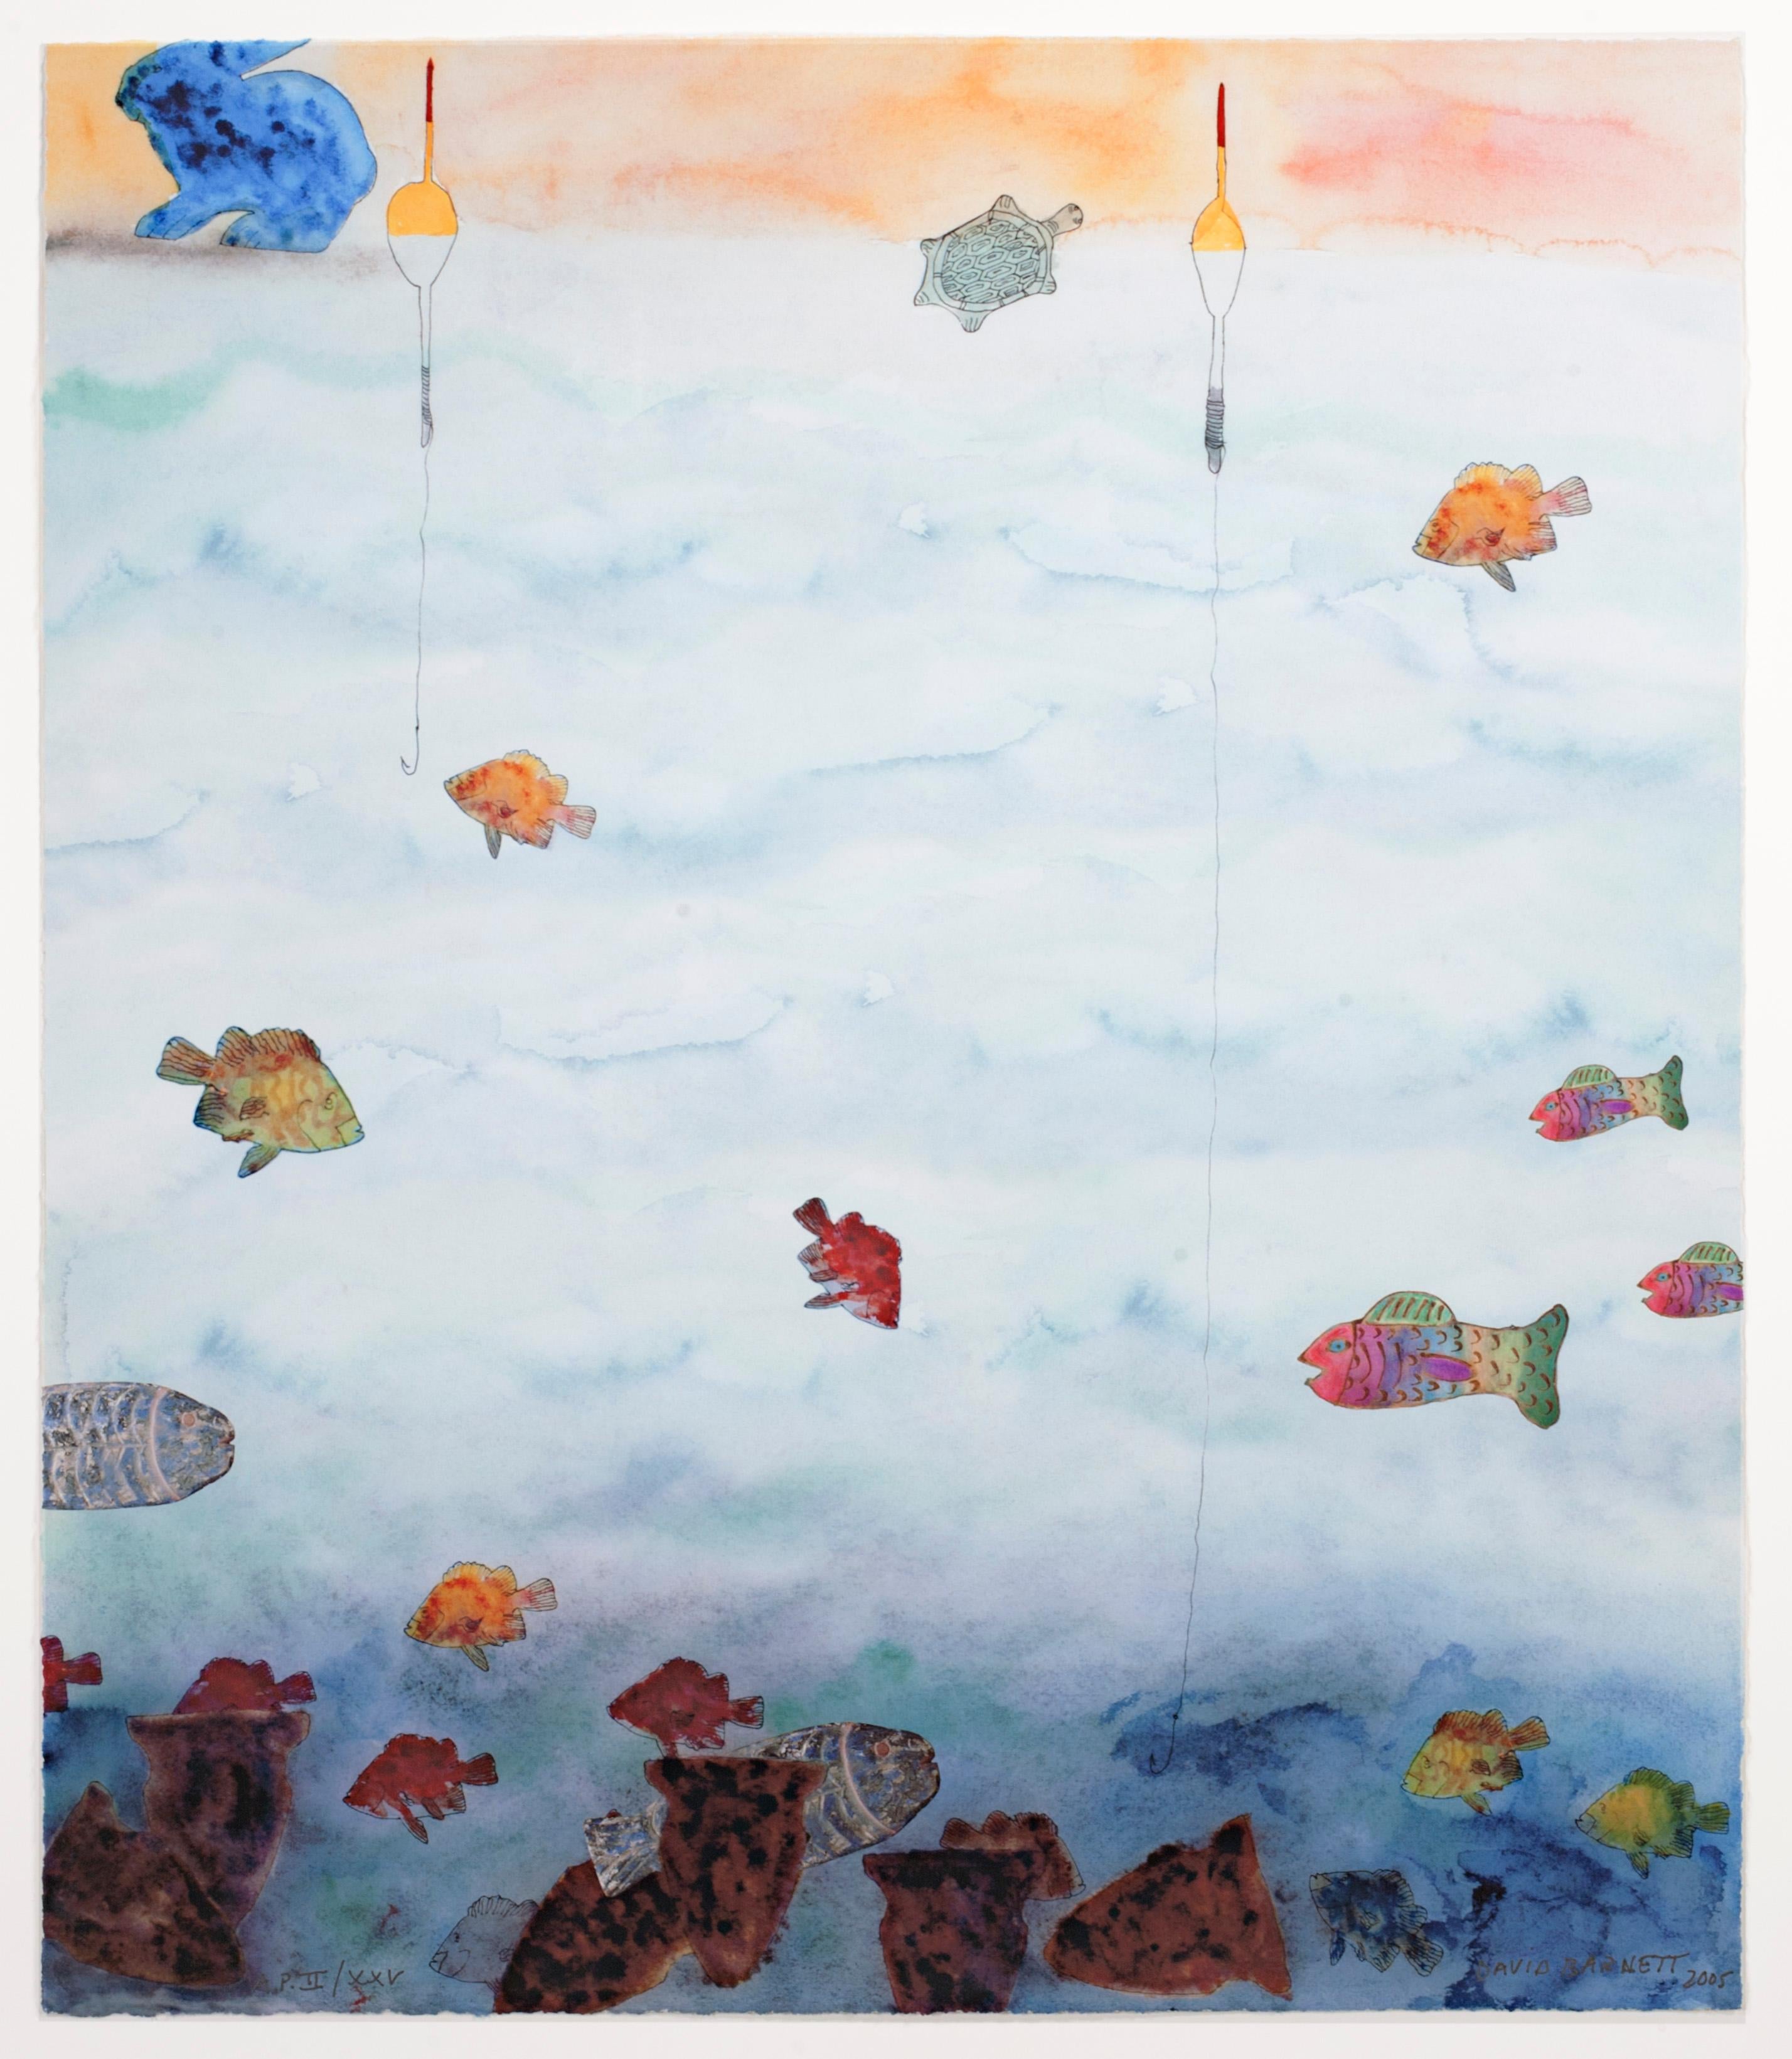 In David Barnett’s ‘Way Down Deep Revisited,’ fishing floats drift placidly across the surface of a lake; below, kaleidoscopic fish view the hooks with mild distrust. Although principally a landscape painting, Barnett’s experimentation with the